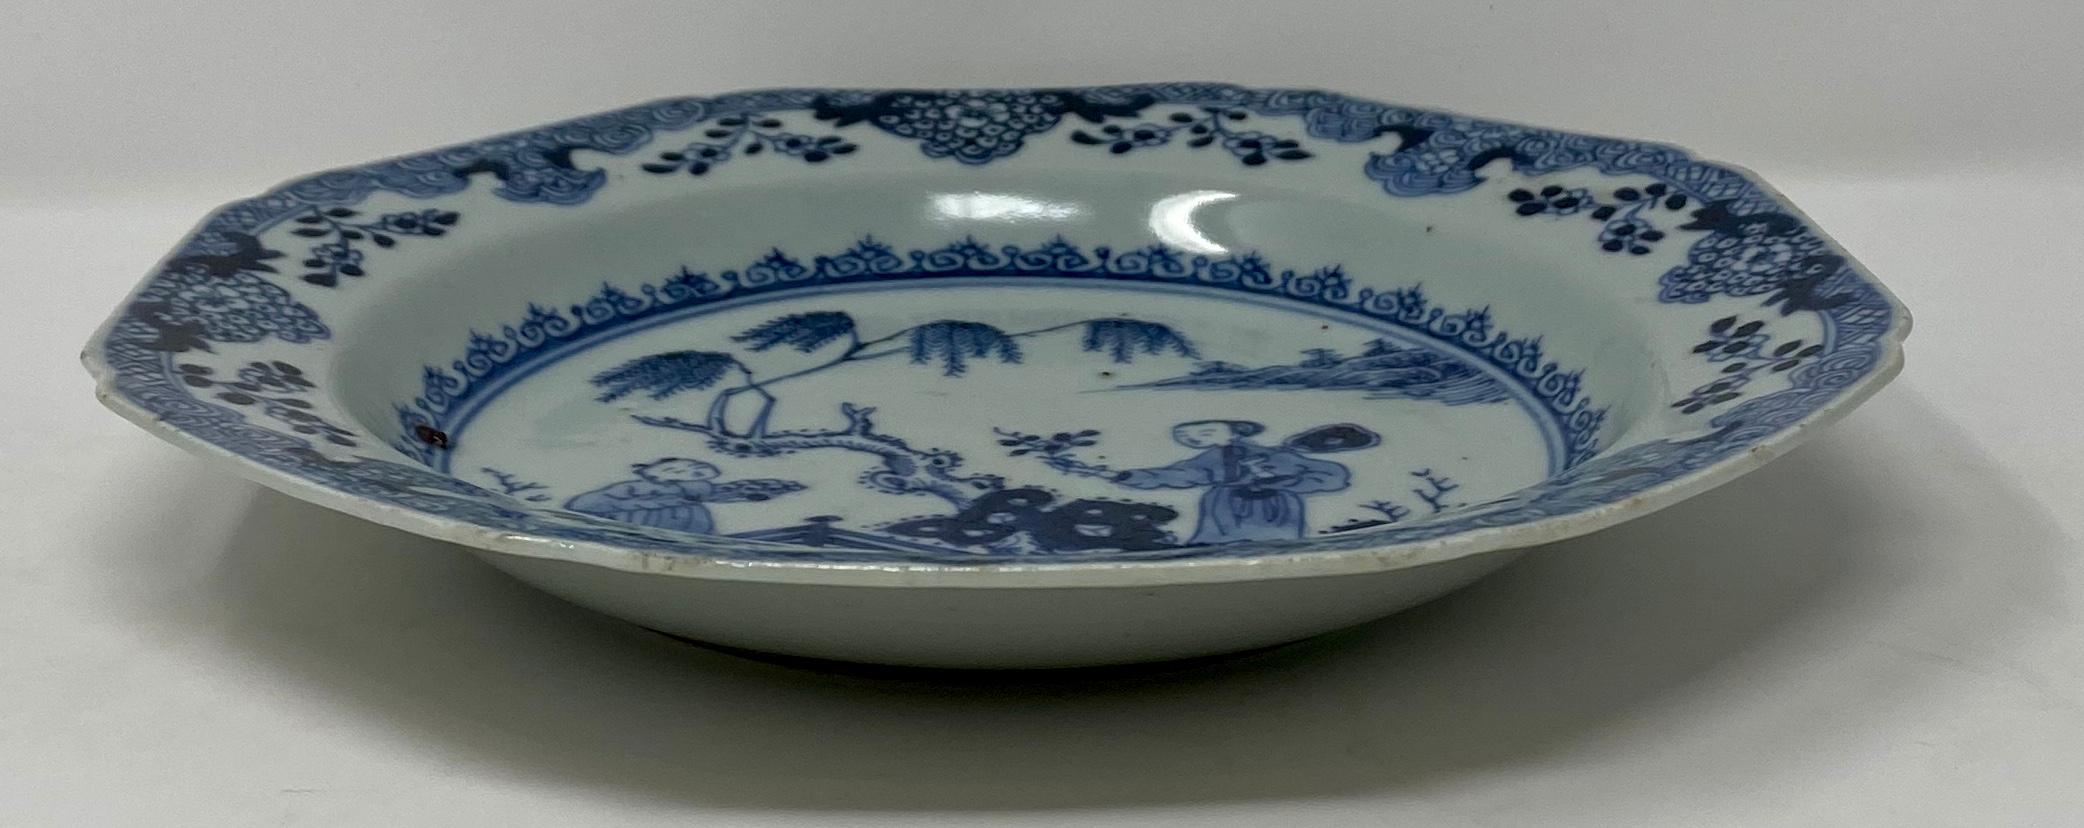 Antique 18th Century Chinese Plate In Good Condition For Sale In New Orleans, LA